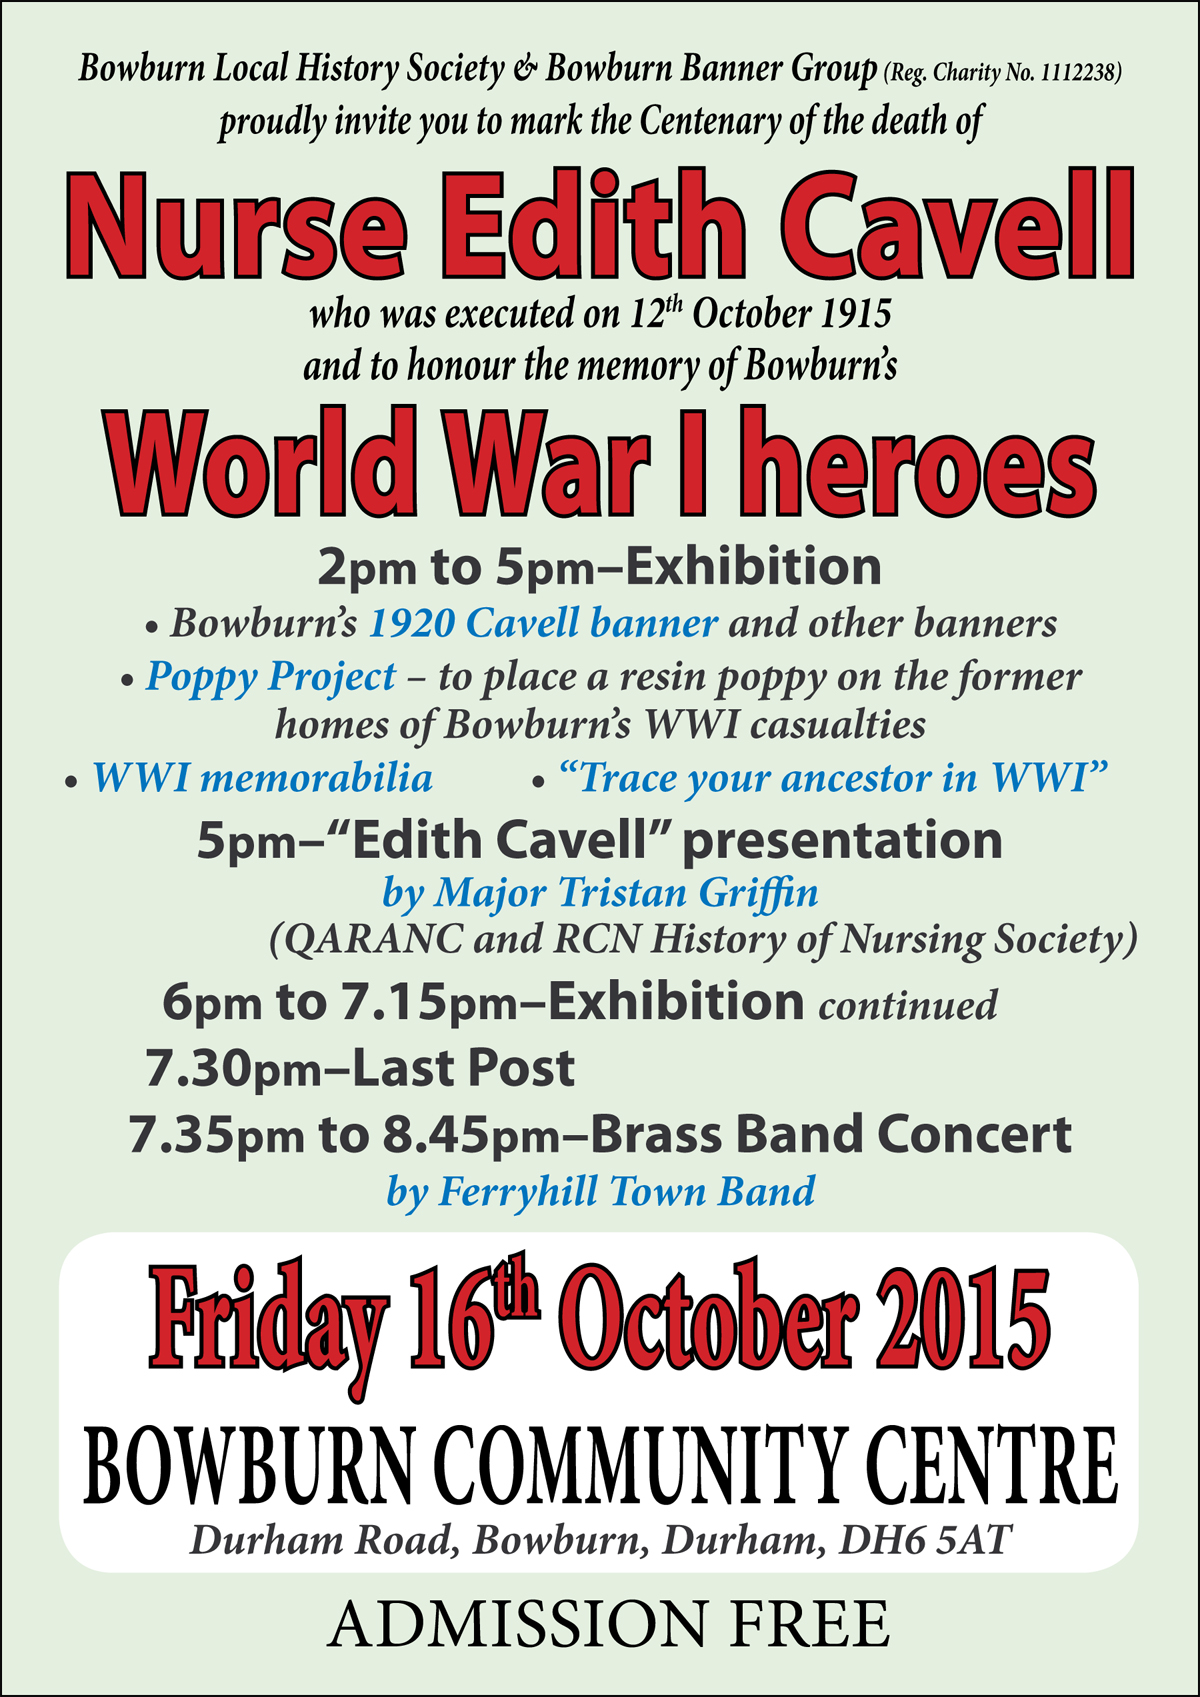 16 October 2015 event poster